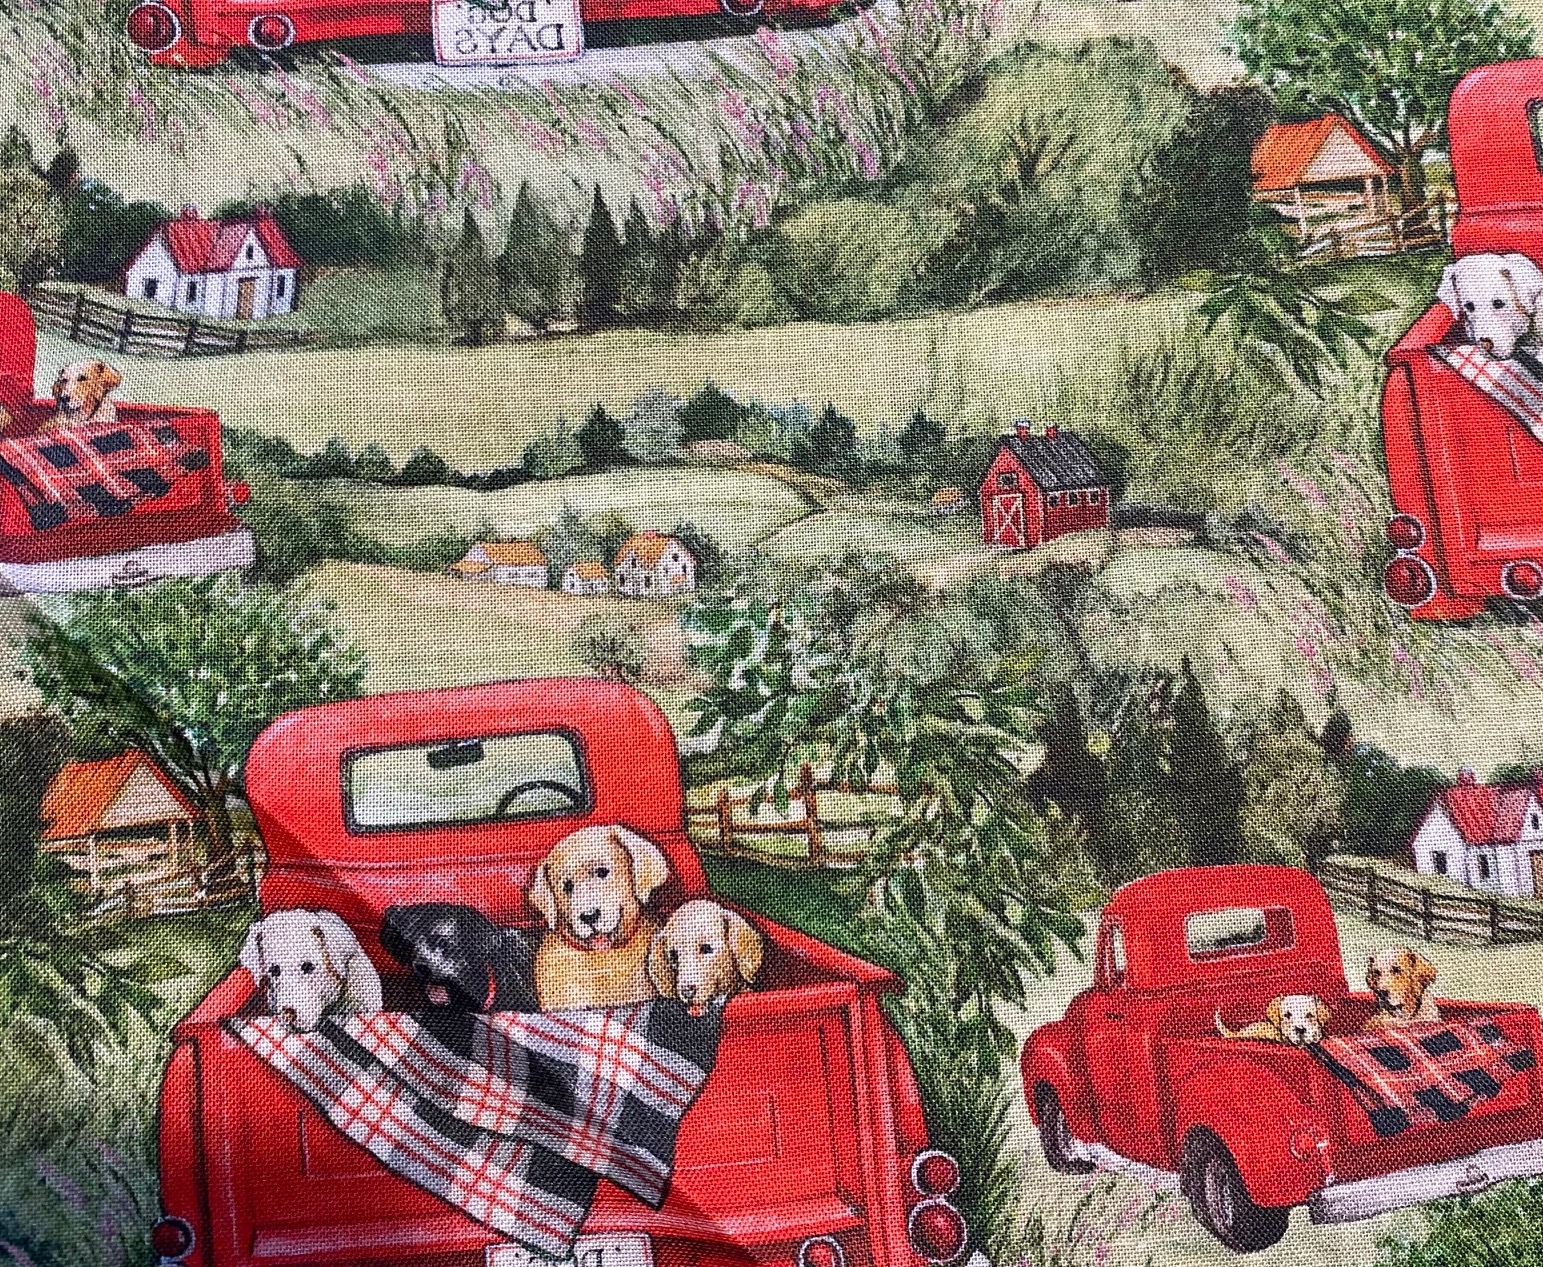 Green countryside with red pickups and blonde and black lab dogs with picnic basket in truck bed with license that says dog days